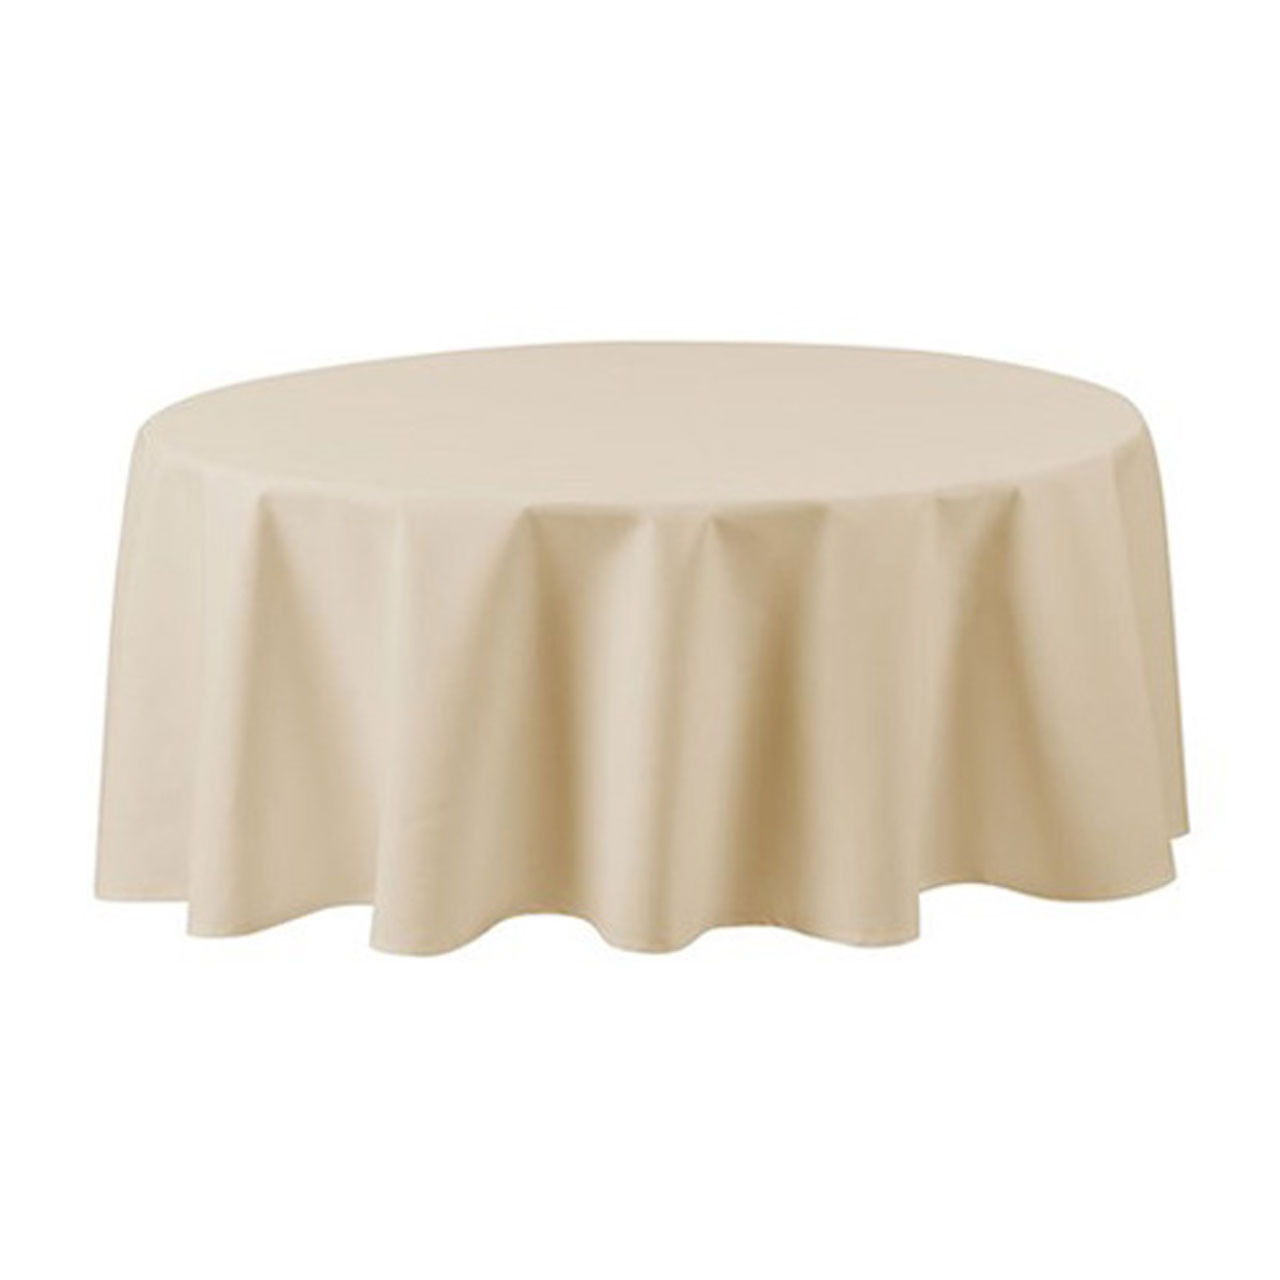 What are the specifications of these round tablecloths in terms of size and material?